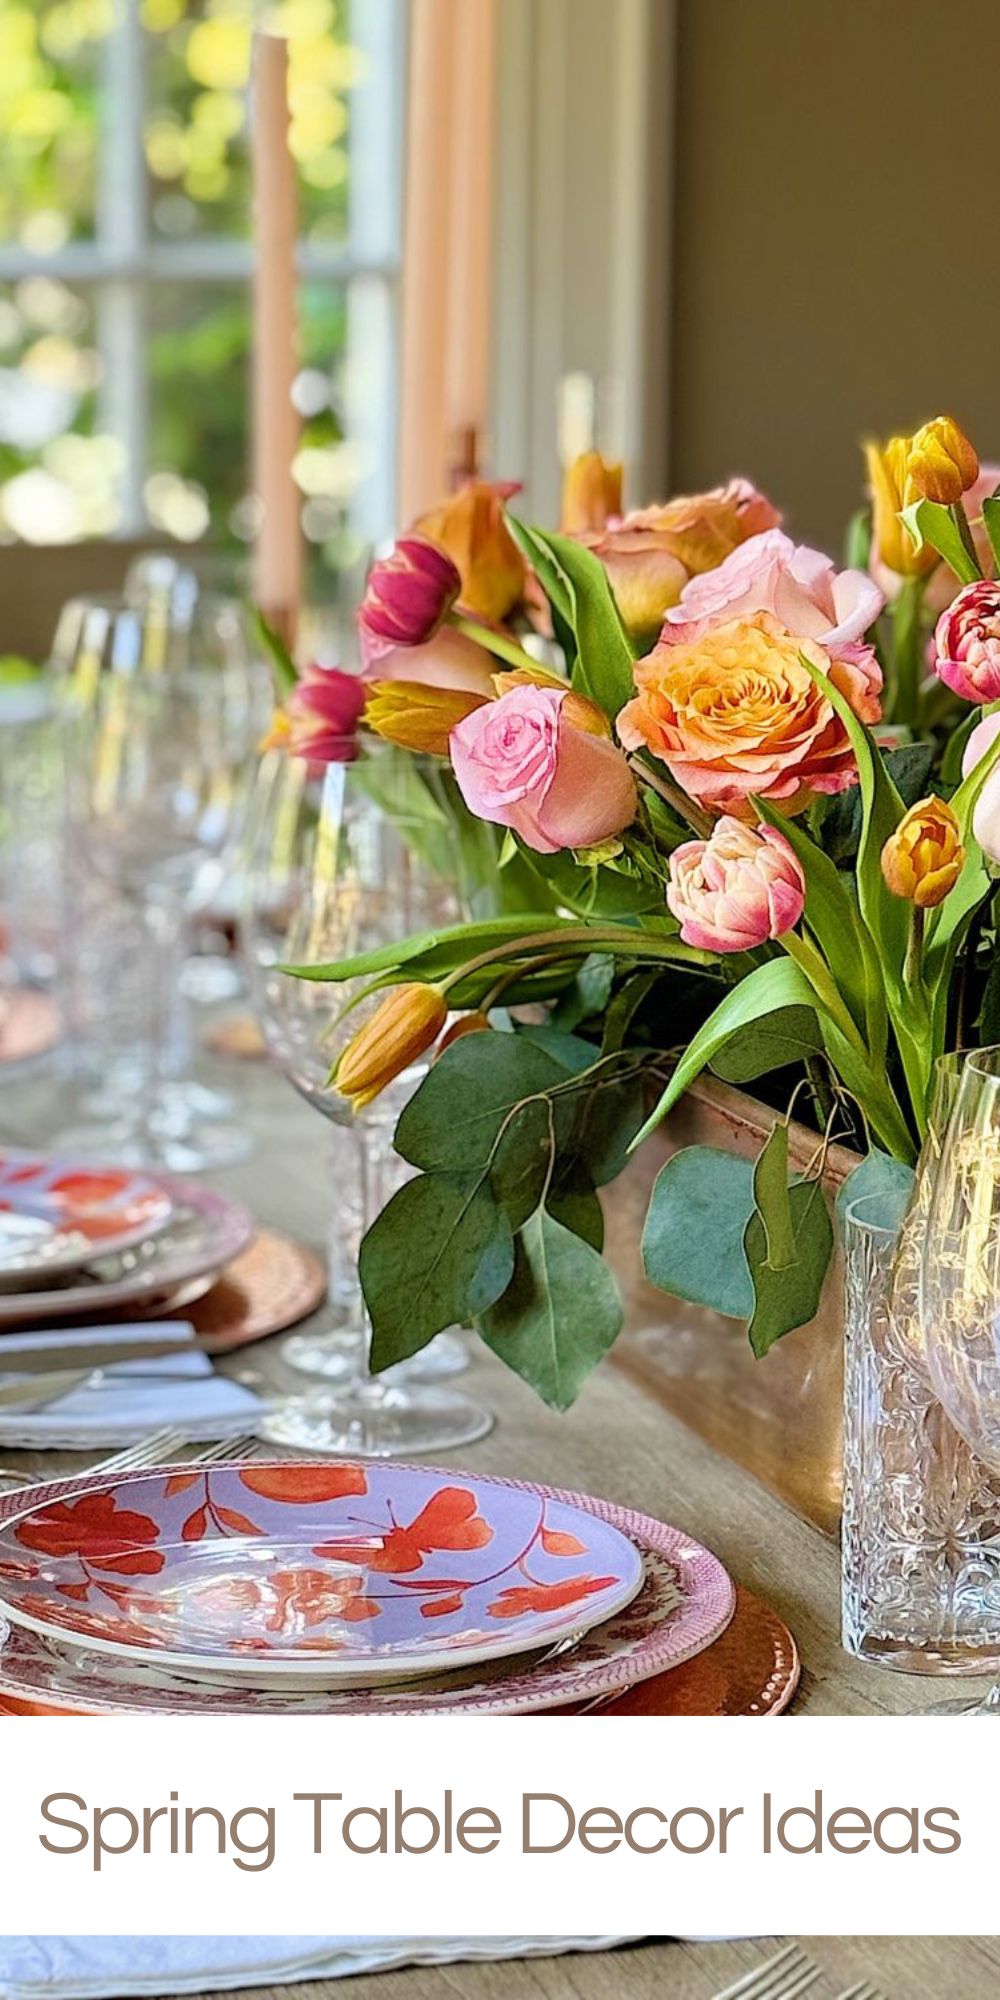 Spring is the perfect time to gather friends and loved ones for a memorable dinner party with good food, great conversation, and beautiful table decor ideas.